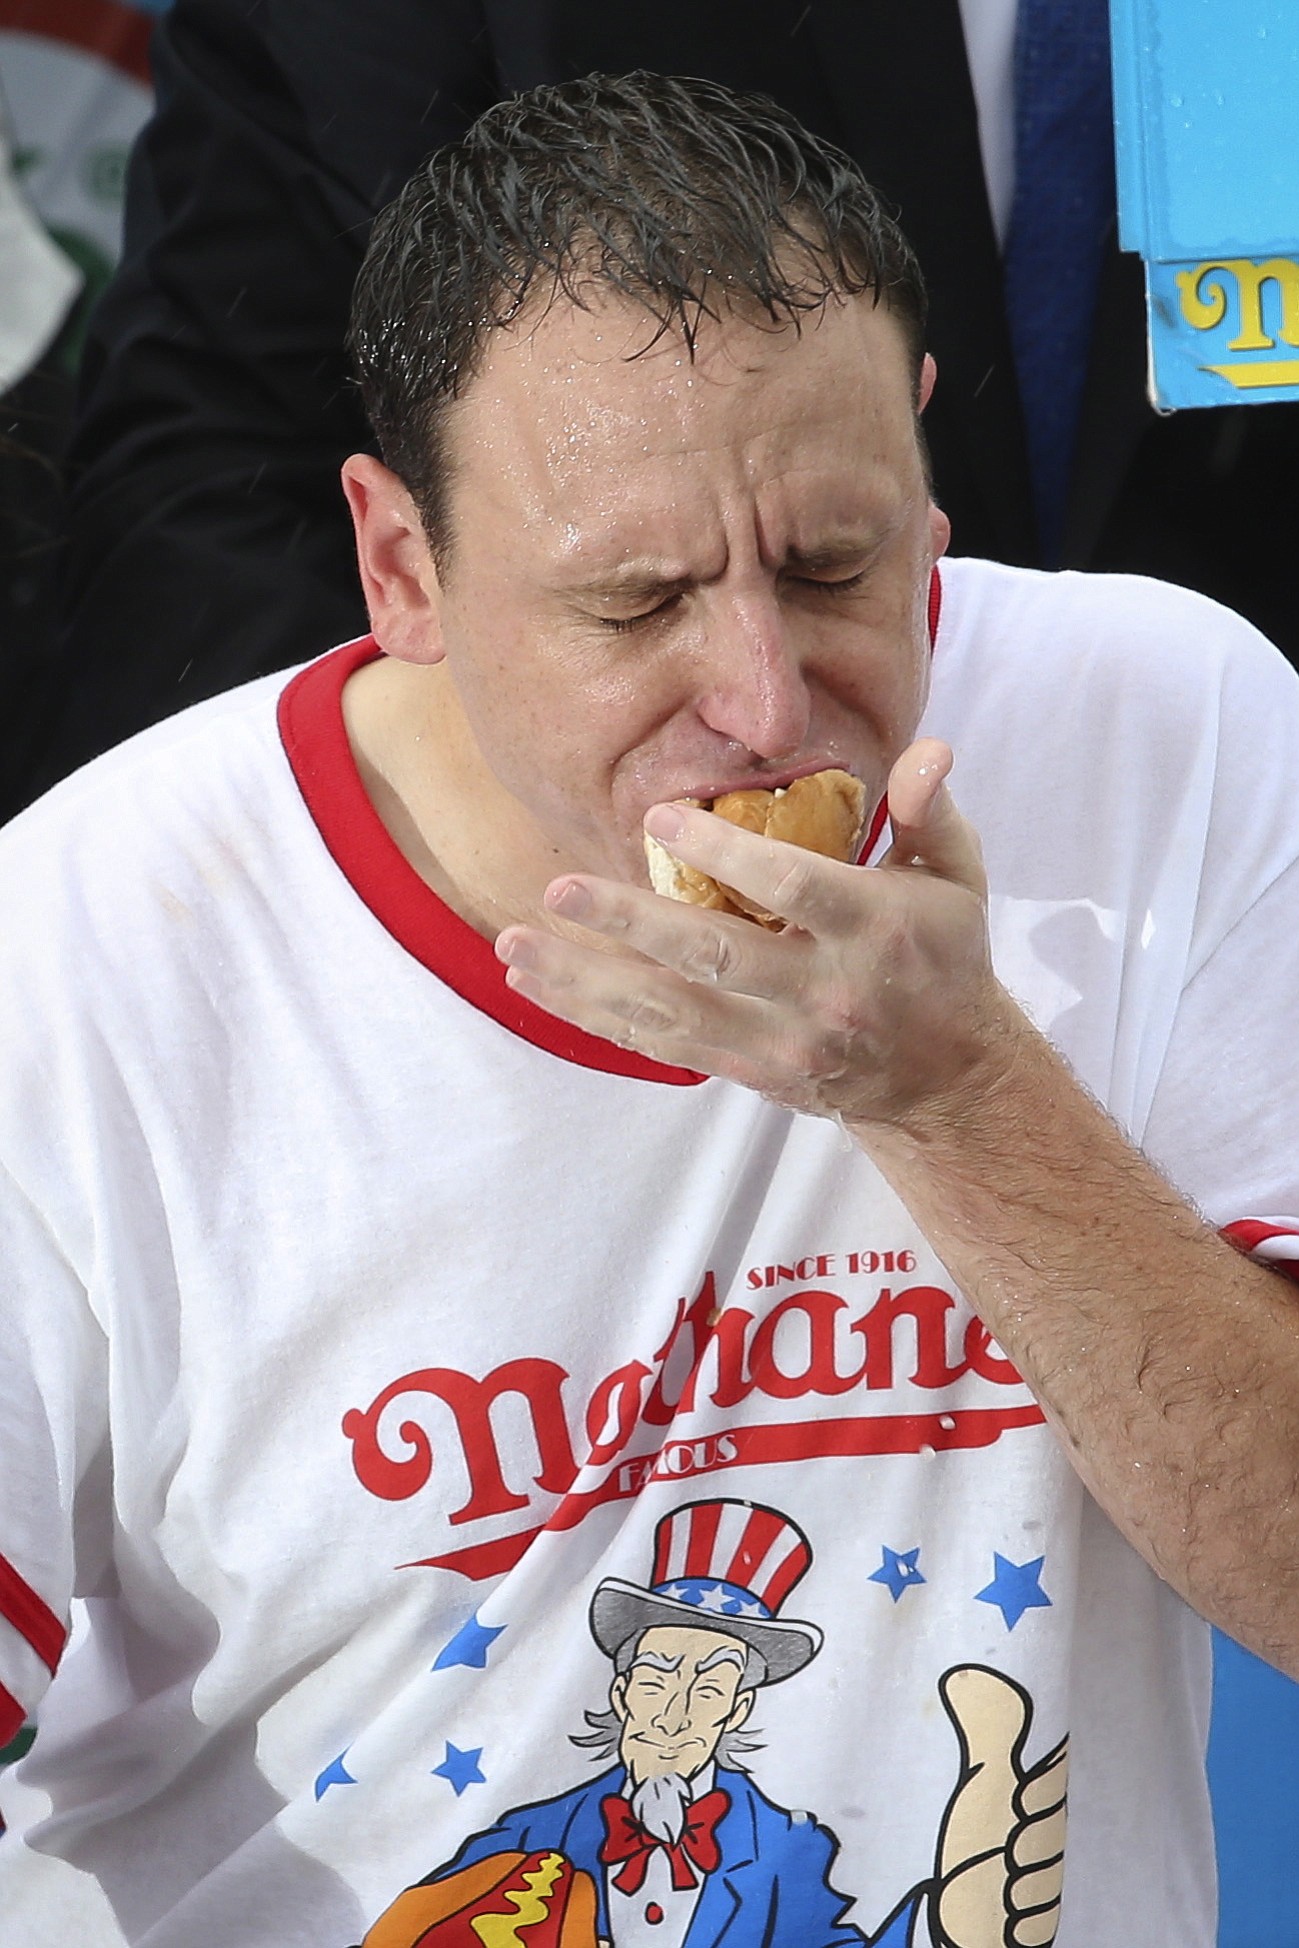 Joey Chestnut won his eighth Nathan's Famous Fourth of July International Hot Dog Eating contest Friday by finishing 61 hot dogs and buns.